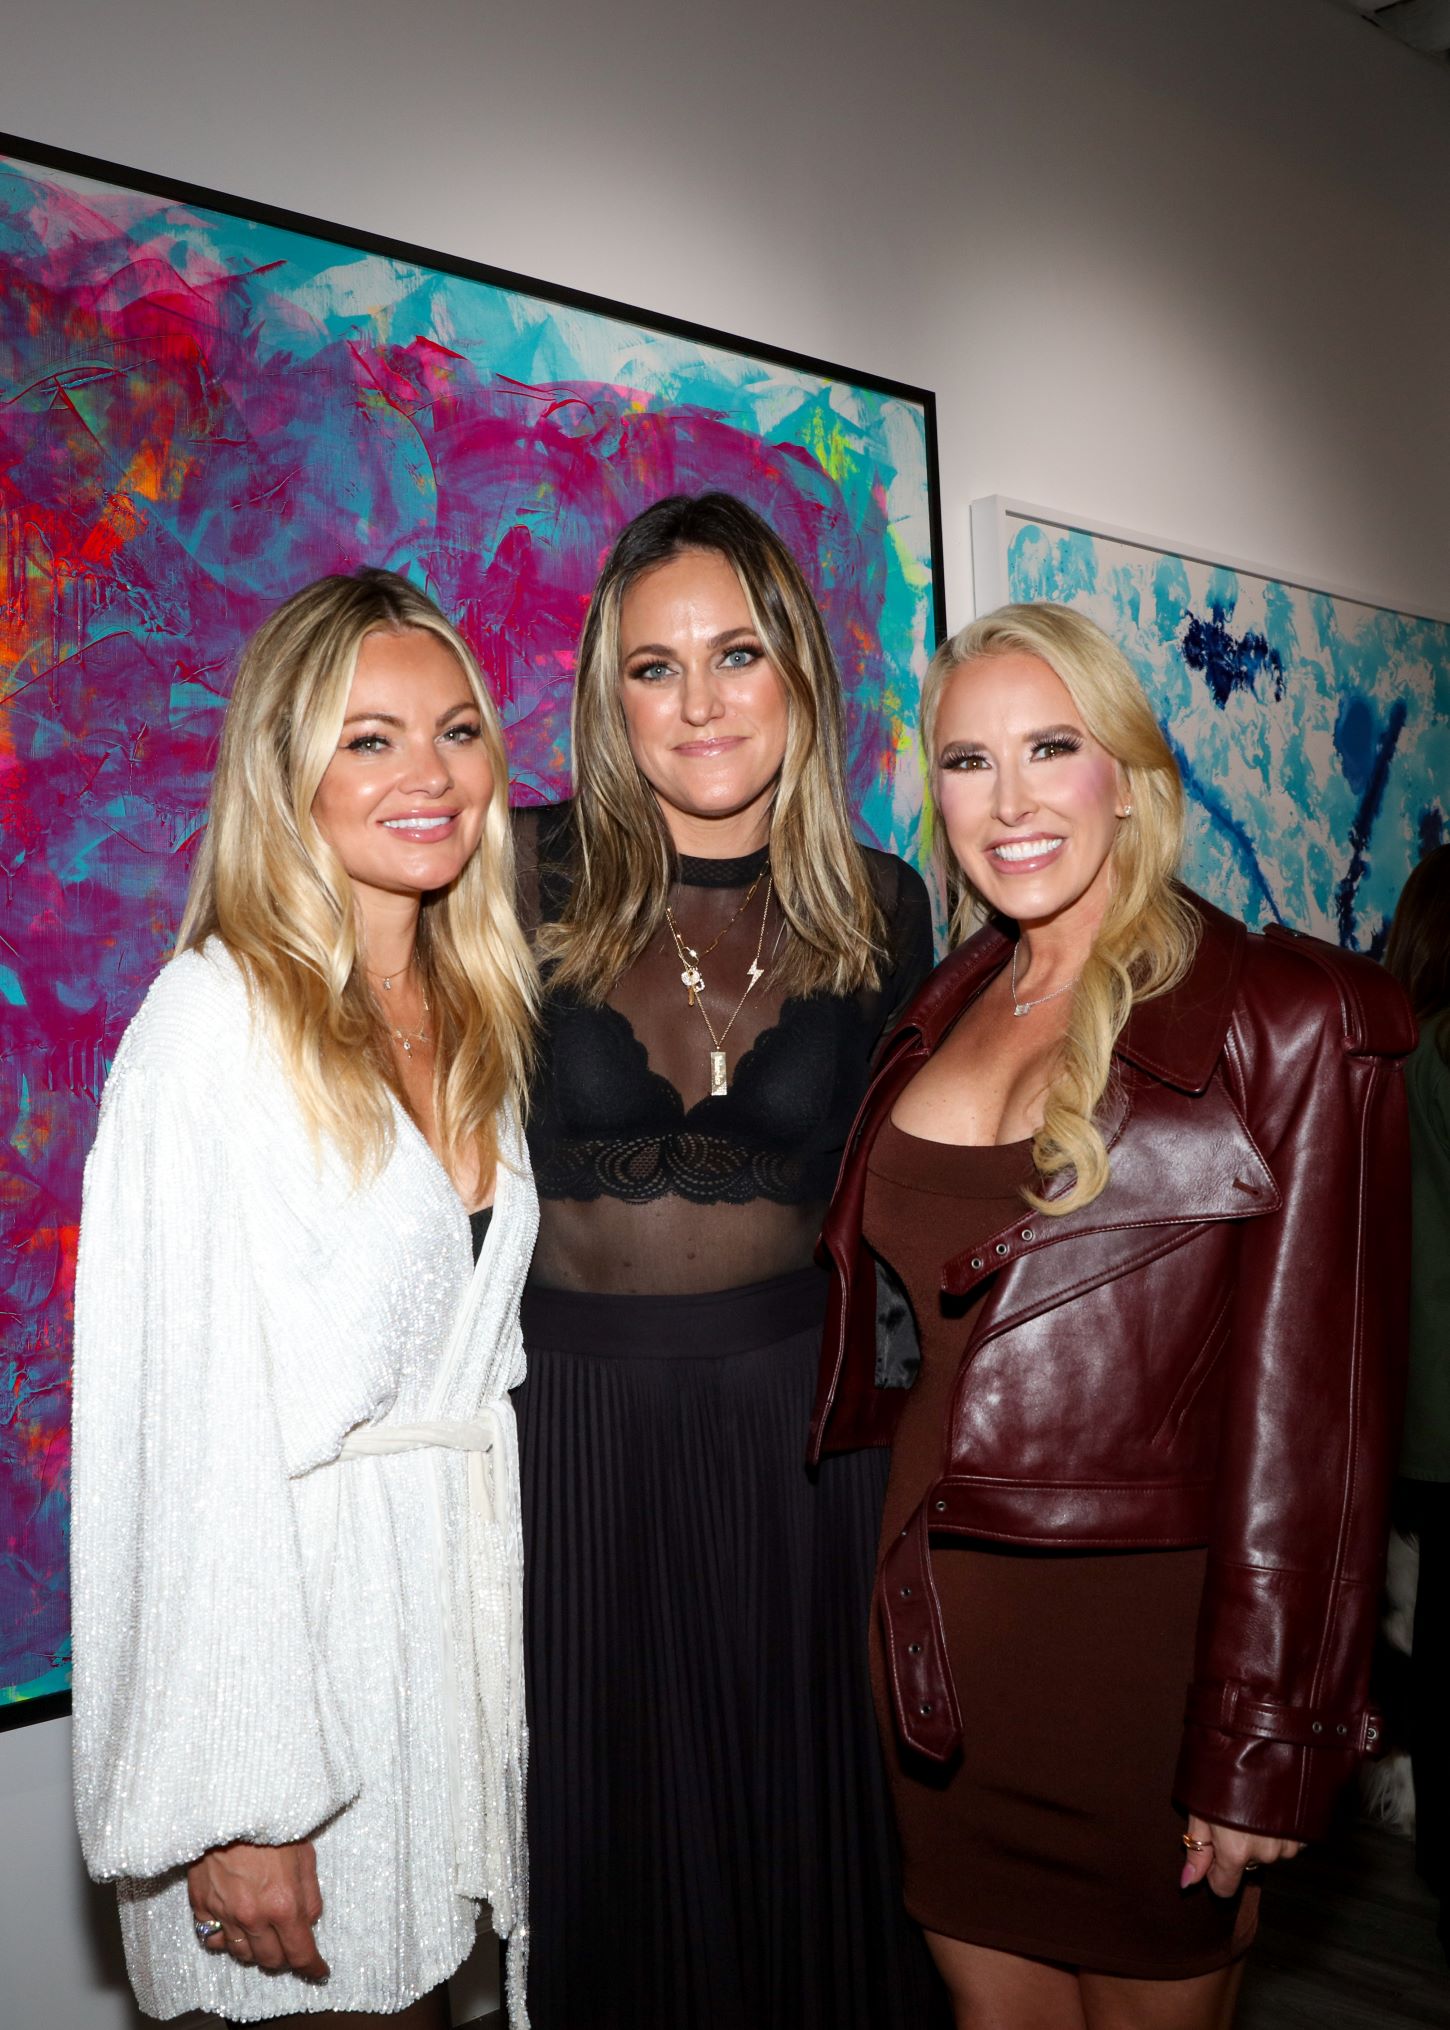 An image of (L - R) Founder of The Giving Keys Caitlin Crosby, CEO and founder of For Ever Fine Jewelry, Jaime Hargreaves, and artist Jenny Chandler.